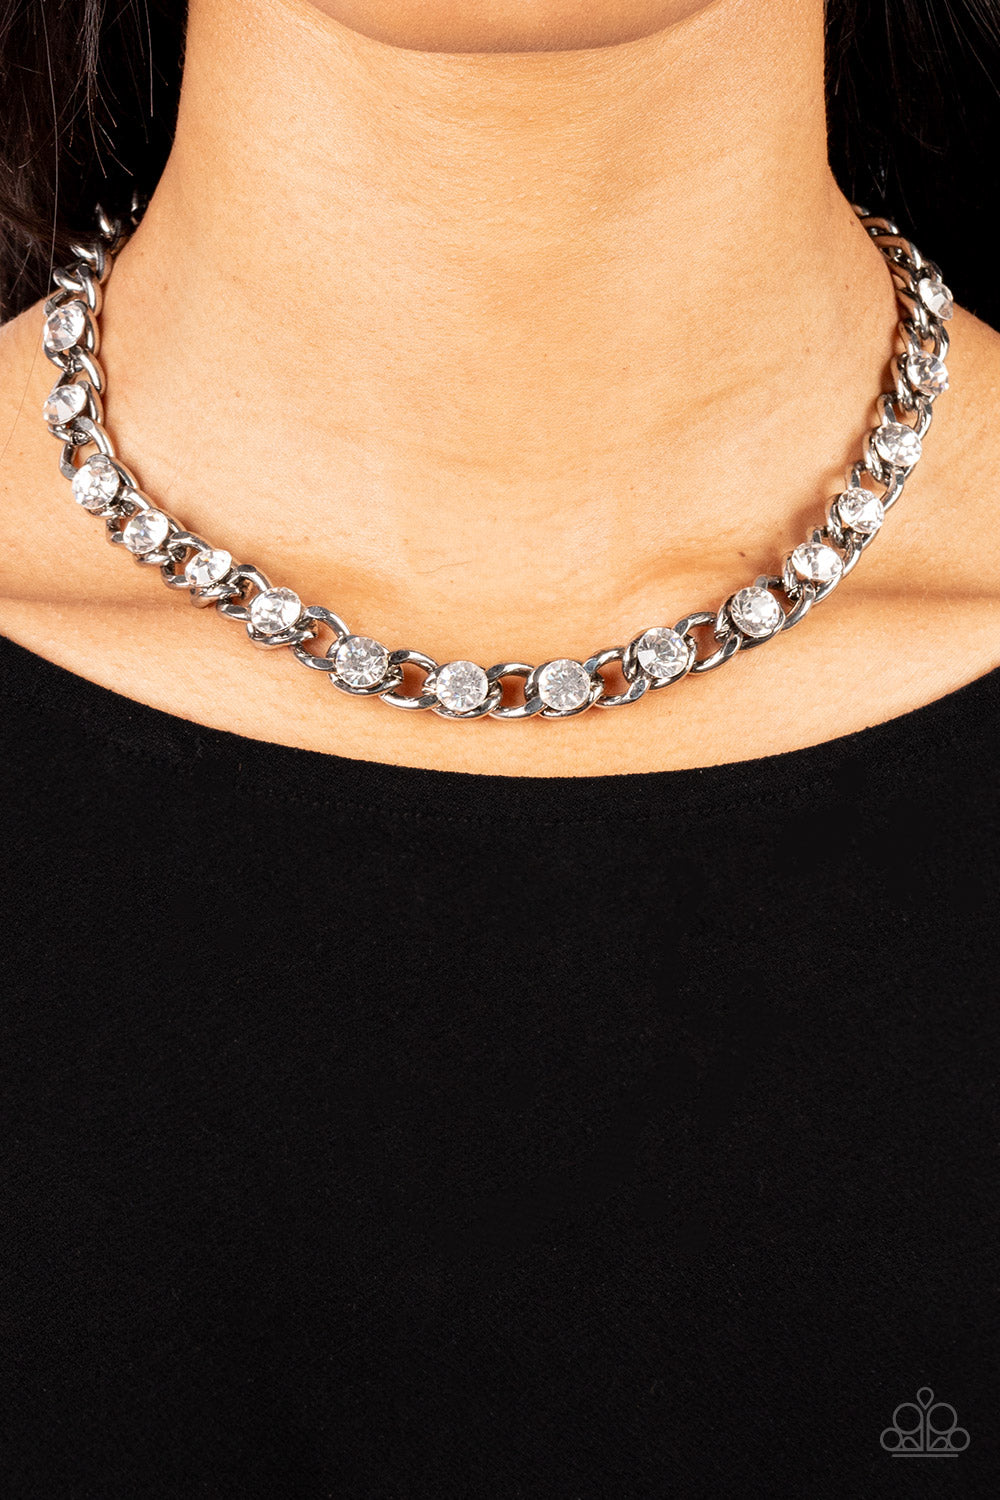 Major Moxie White Necklace - Paparazzi Accessories  Oversized white rhinestones dot a row of oversized silver chain, resulting in a gritty glitz below the collar. Features an adjustable clasp closure.  Sold as one individual necklace. Includes one pair of matching earrings.